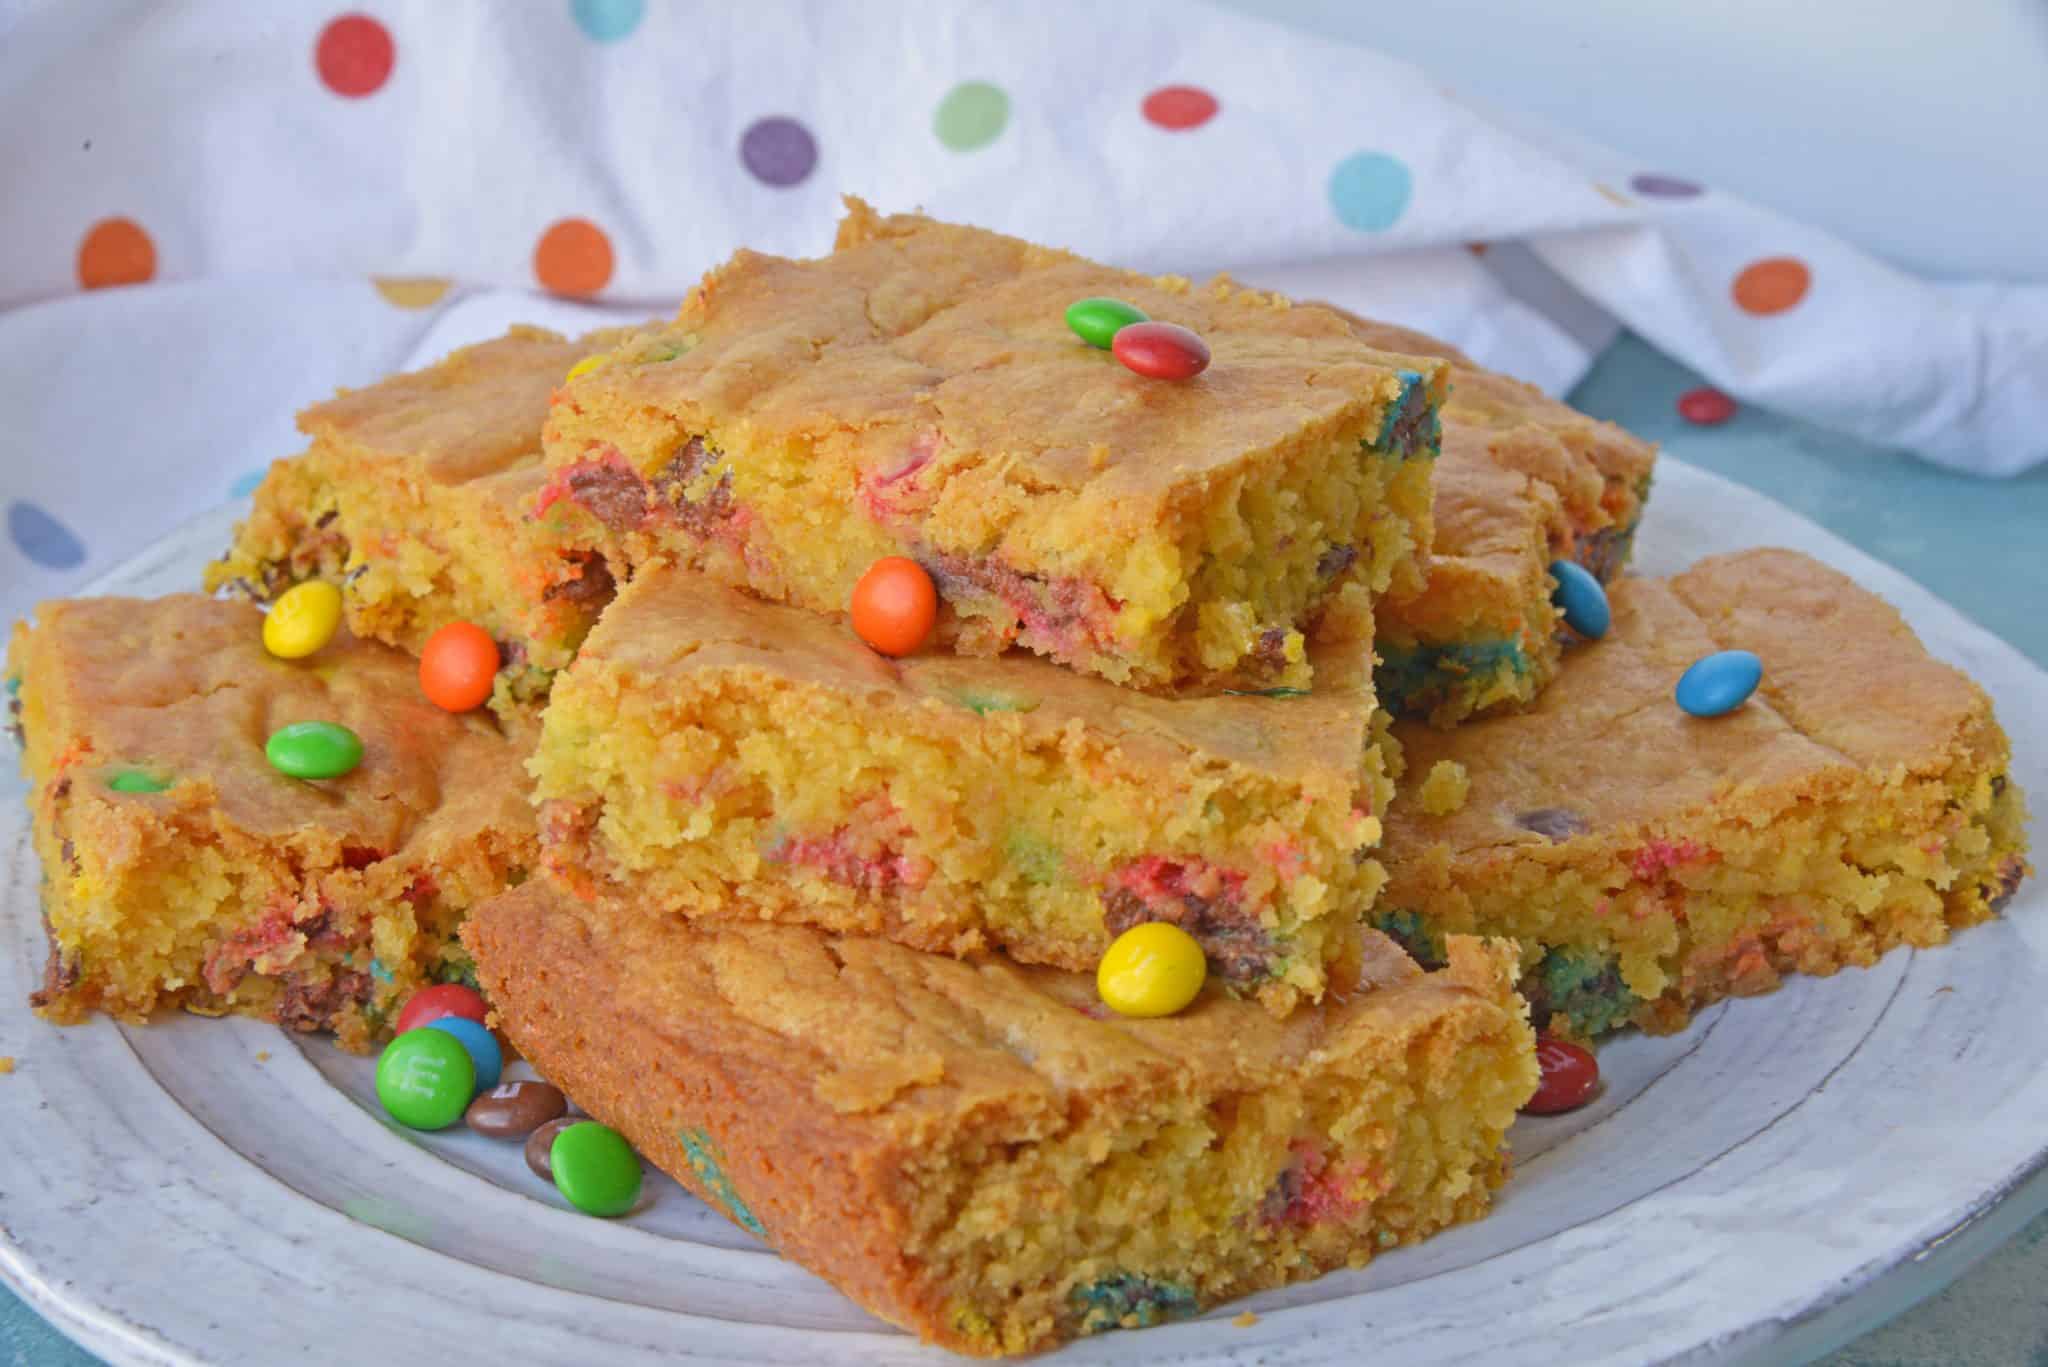 Thick and chewy M&M Cookie Bars are perfect for your cookie exchange, dessert potluck or an after school snack using just a few ingredients! #cookiebars #easydessertrecipes www.savoryexperiments.com